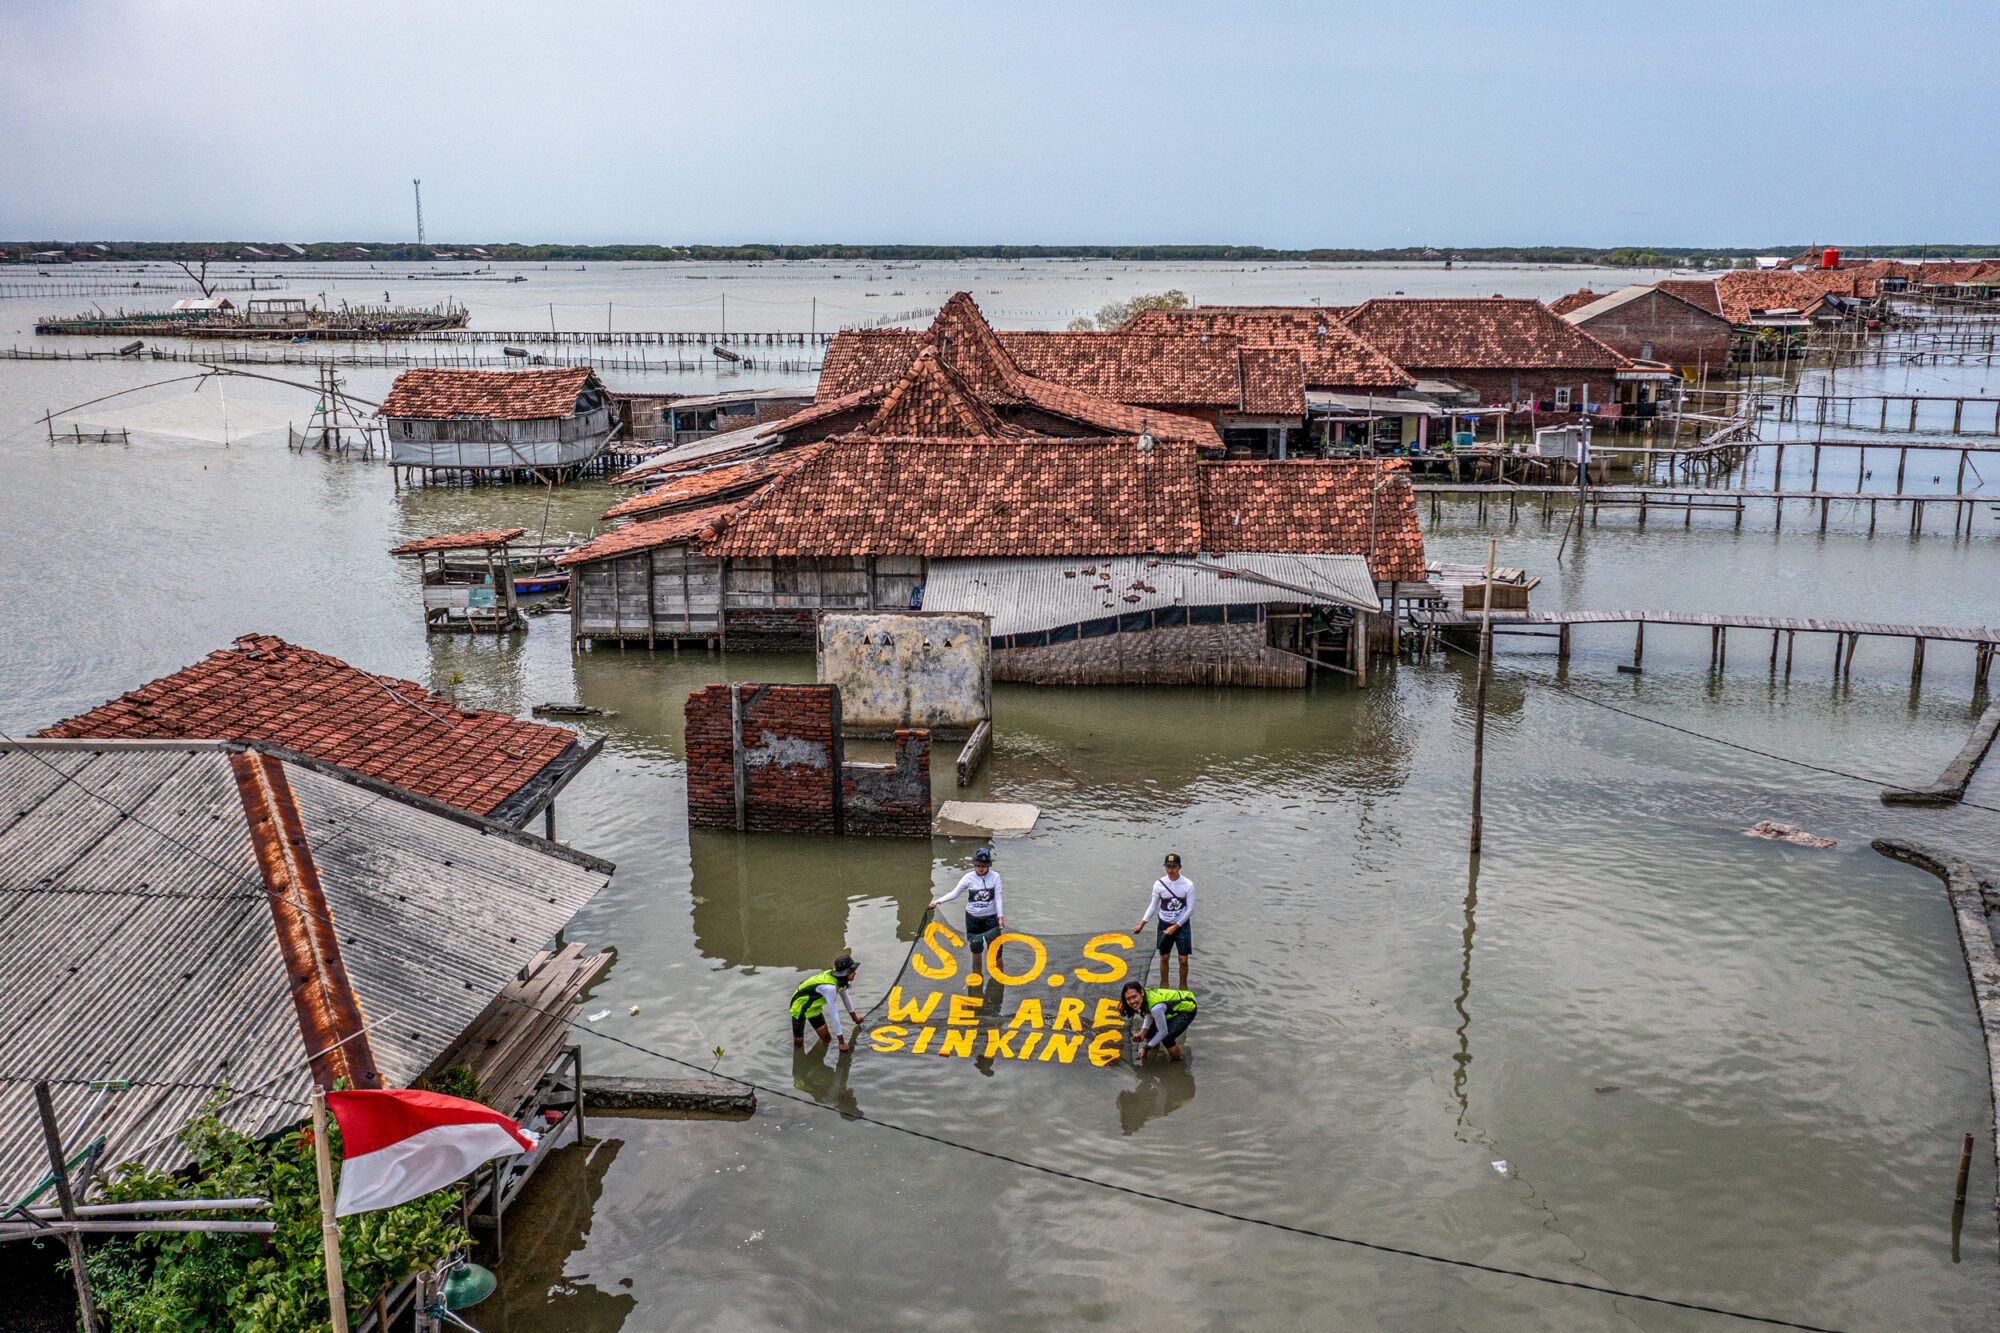 Red roofs poke from water in a submerged village, as campaigners stretch a banner reading "S.O.S we are sinking".